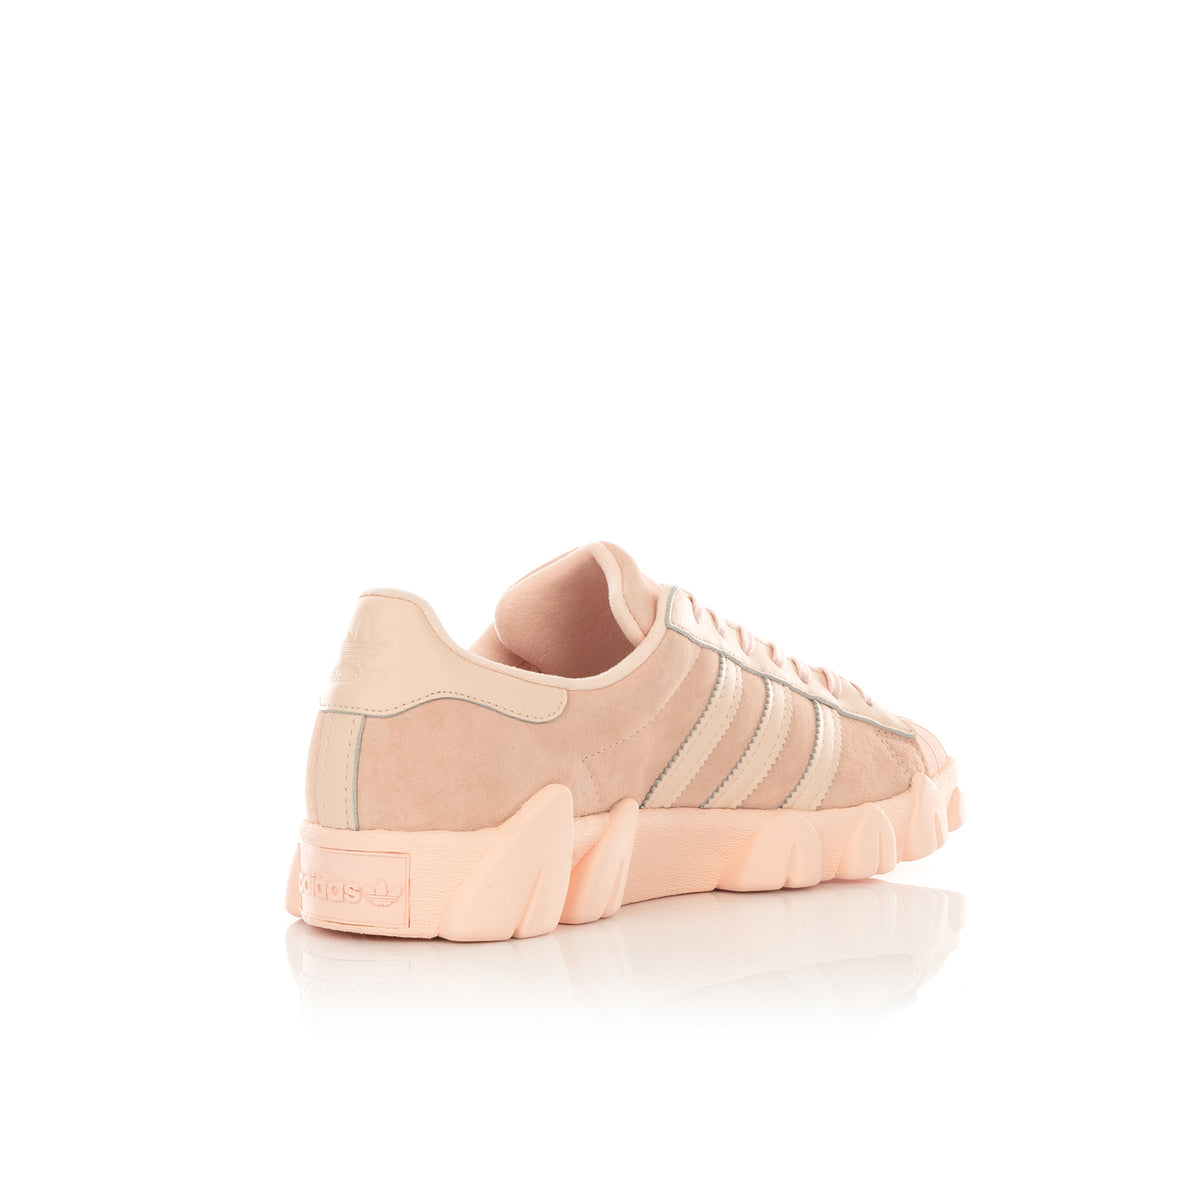 adidas by Angel Chen | Superstar 80's Ice Pink - FY5351 - Concrete